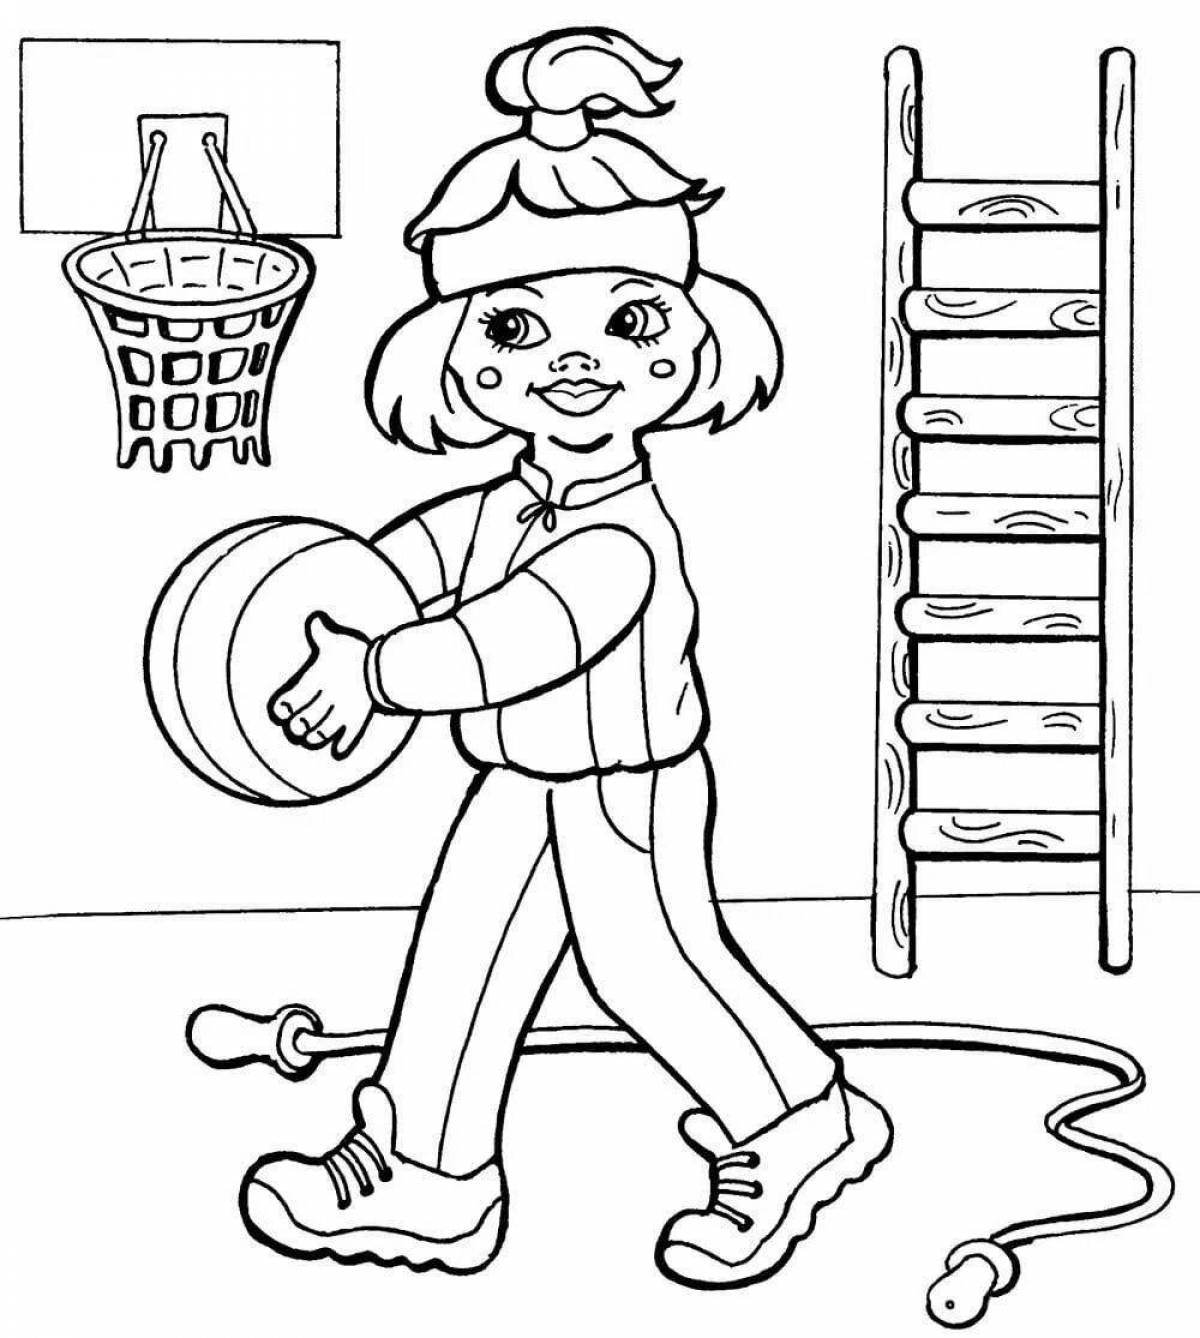 Educated Health Coloring Page for Seniors